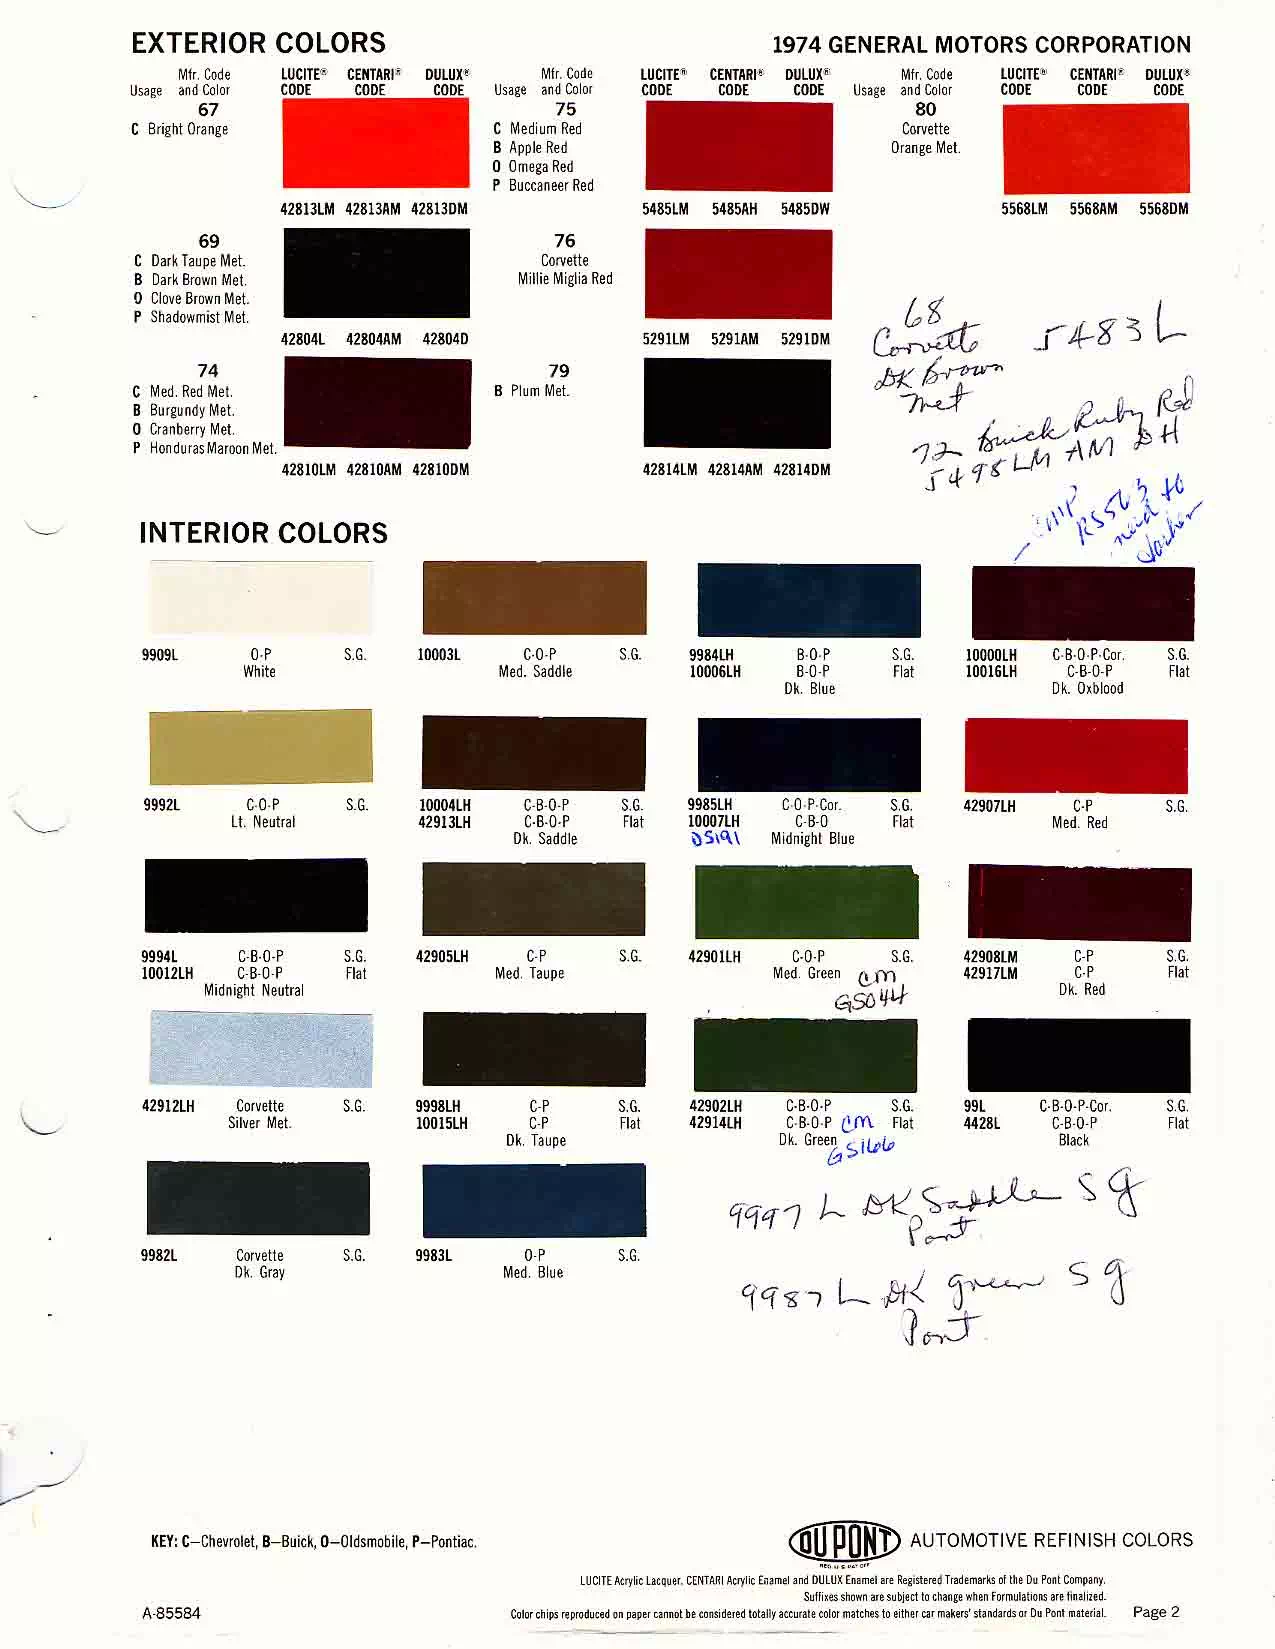 Colors, Descriptions, Codes, and Paint Swatches for General Motors Vehicles in 1974